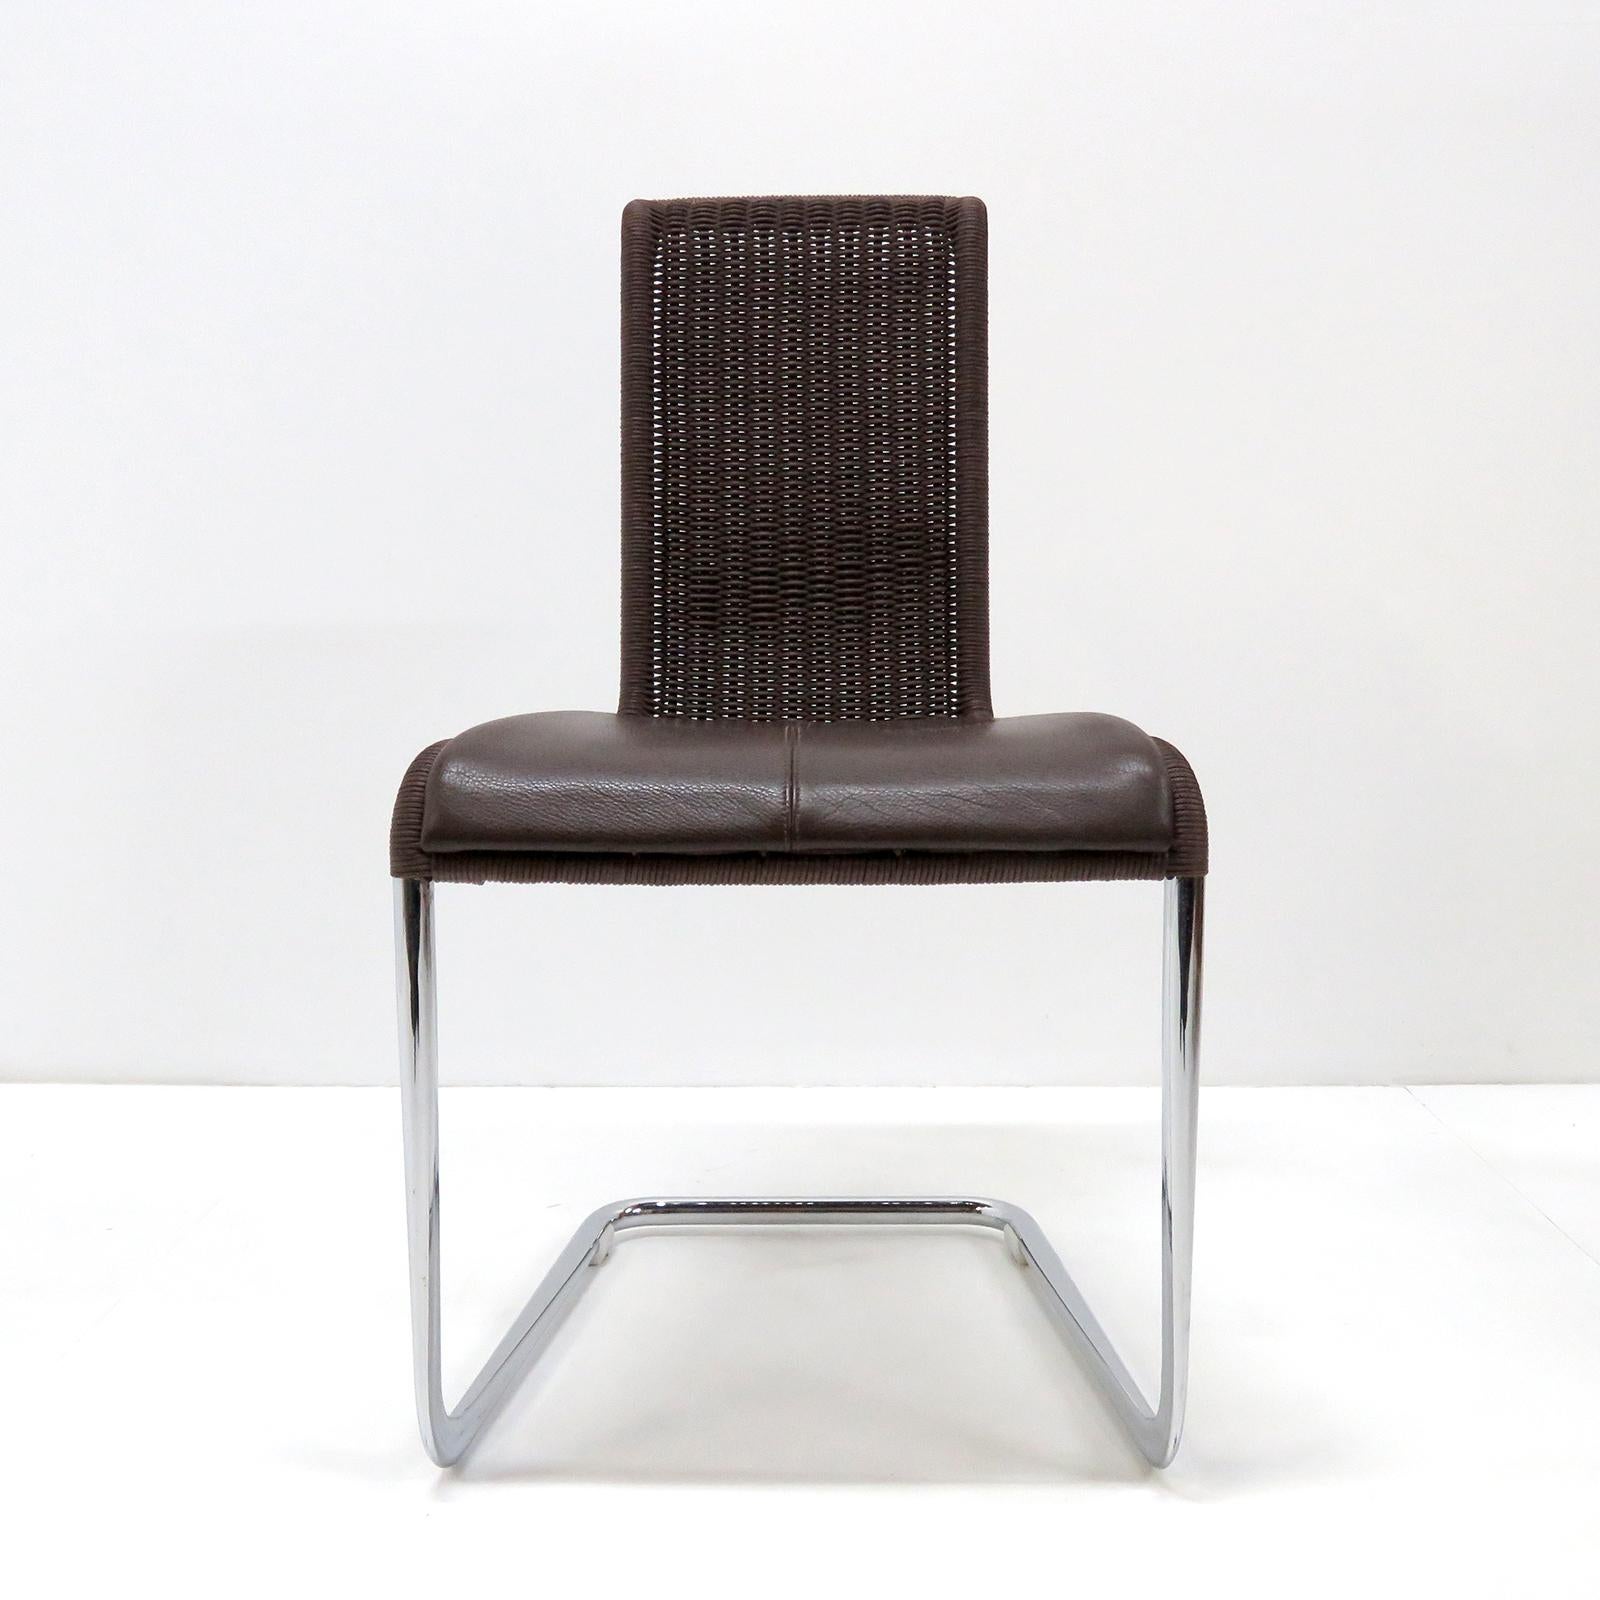 Wonderful high back cantilever chairs B45 by Tecta, 1981 in dark brown wickerwork and detachable brown leather seating pads on a 'tube aplati' chrome plated steel frame. 'Tube aplati' is a steel tube flattening technique that was first used by Jean